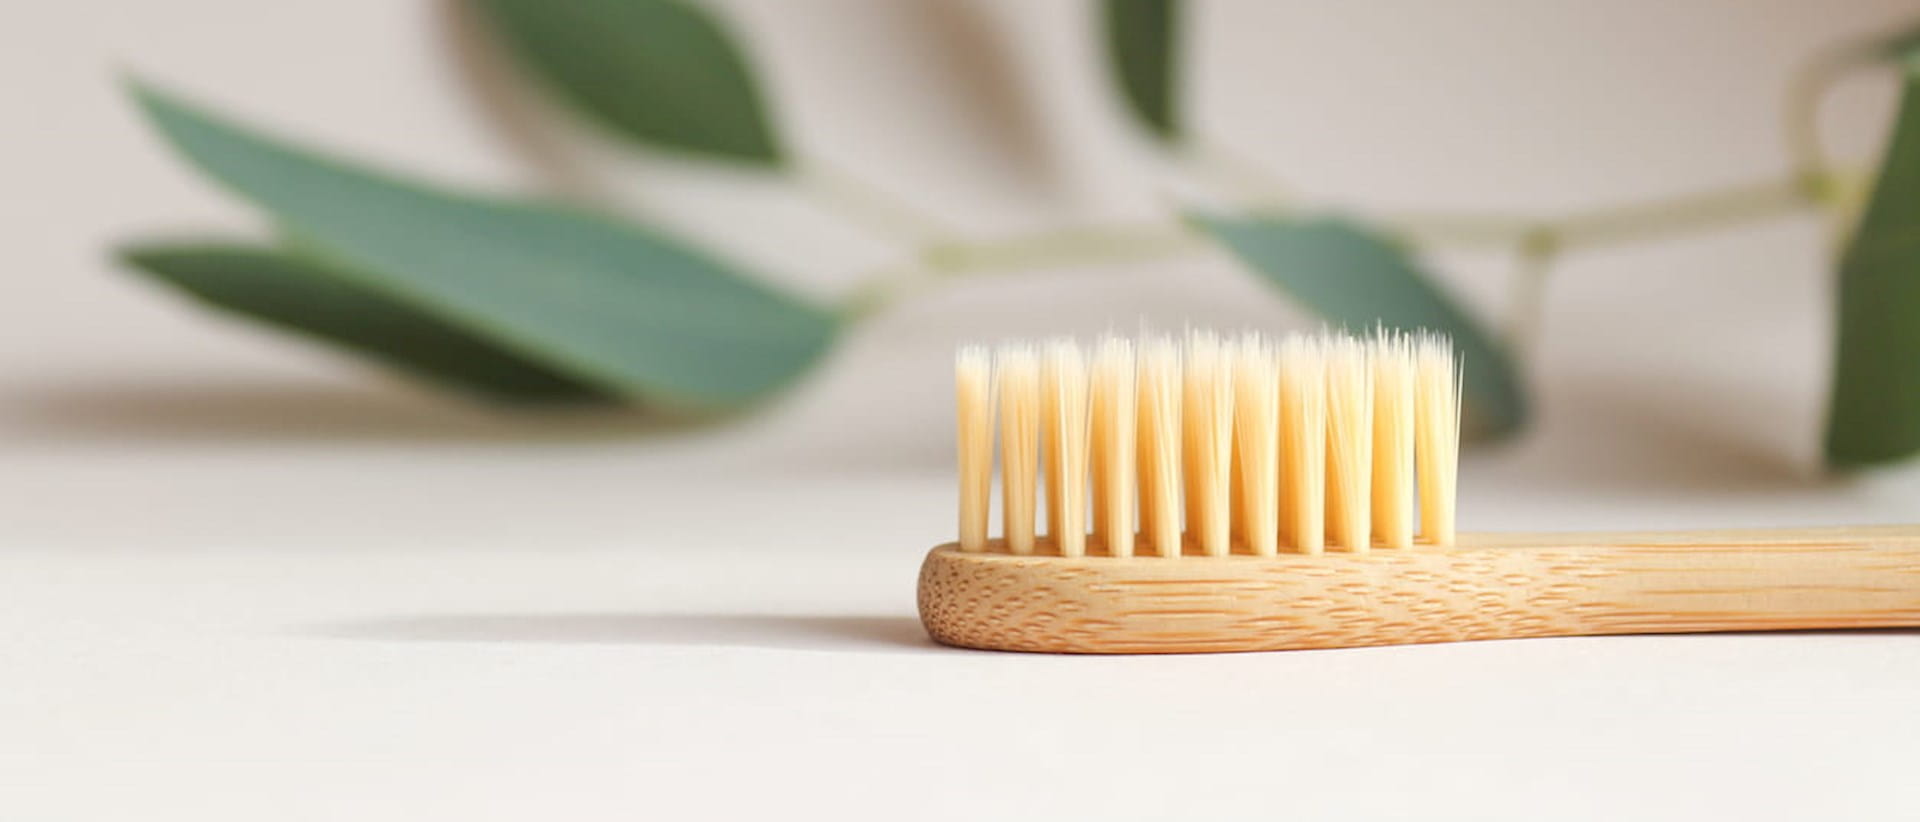 Bamboo toothbrush with leaves in background